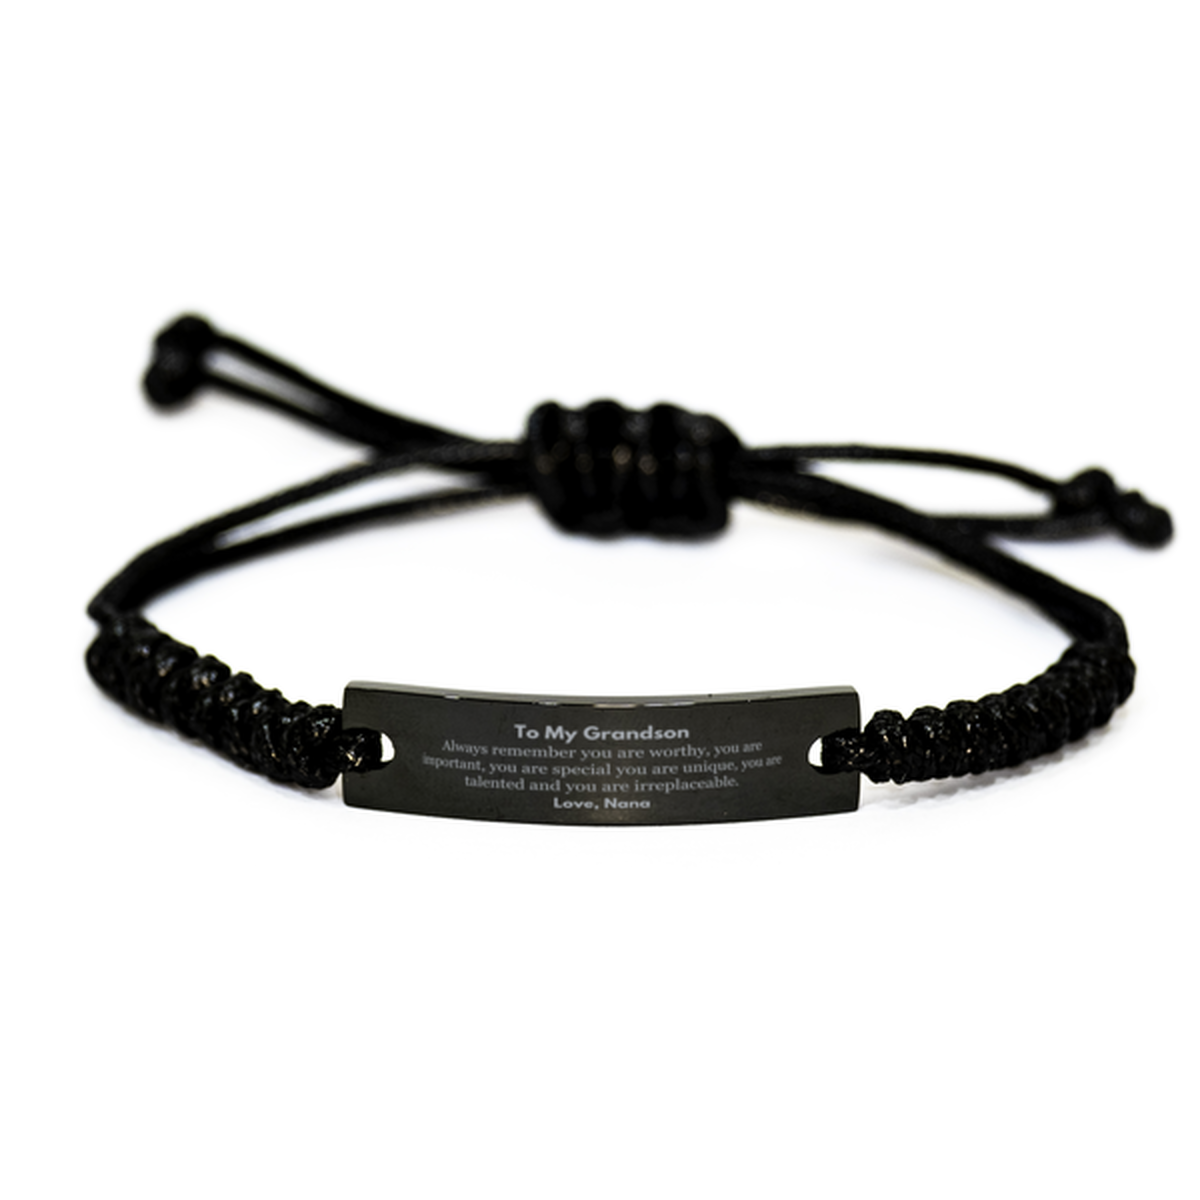 Grandson Birthday Gifts from Nana, Inspirational Black Rope Bracelet for Grandson Christmas Graduation Gifts for Grandson Always remember you are worthy, you are important. Love, Nana